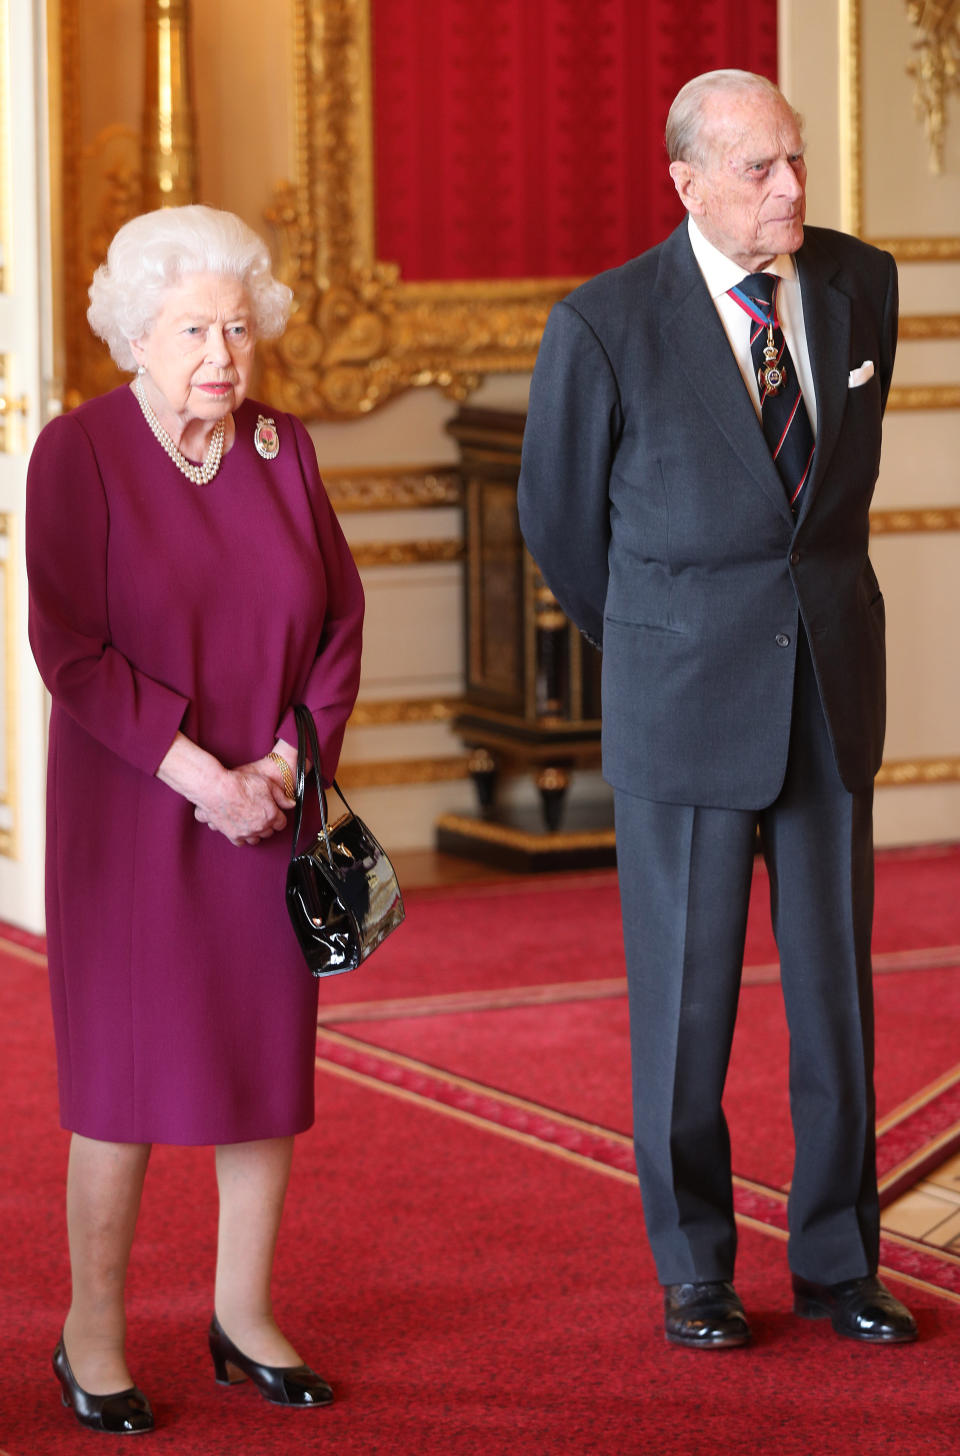 WINDSOR, ENGLAND - MAY 7: Queen Elizabeth II and Prince Philip, Duke of Edinburgh join members of the Order of Merit ahead of a luncheon at Windsor Castle on May 7, 2019 in Windosr, England. Established in 1902 by King Edward VII, The Order of Merit recognises distinguished service in the armed forces, science, art, literature, or for the promotion of culture. Admission into the order remains the personal gift of The Queen and is restricted to a maximum of 24 living recipients from the Commonwealth realms, plus a limited number of honorary members. (Photo by Jonathan Brady - WPA Pool/Getty Images)